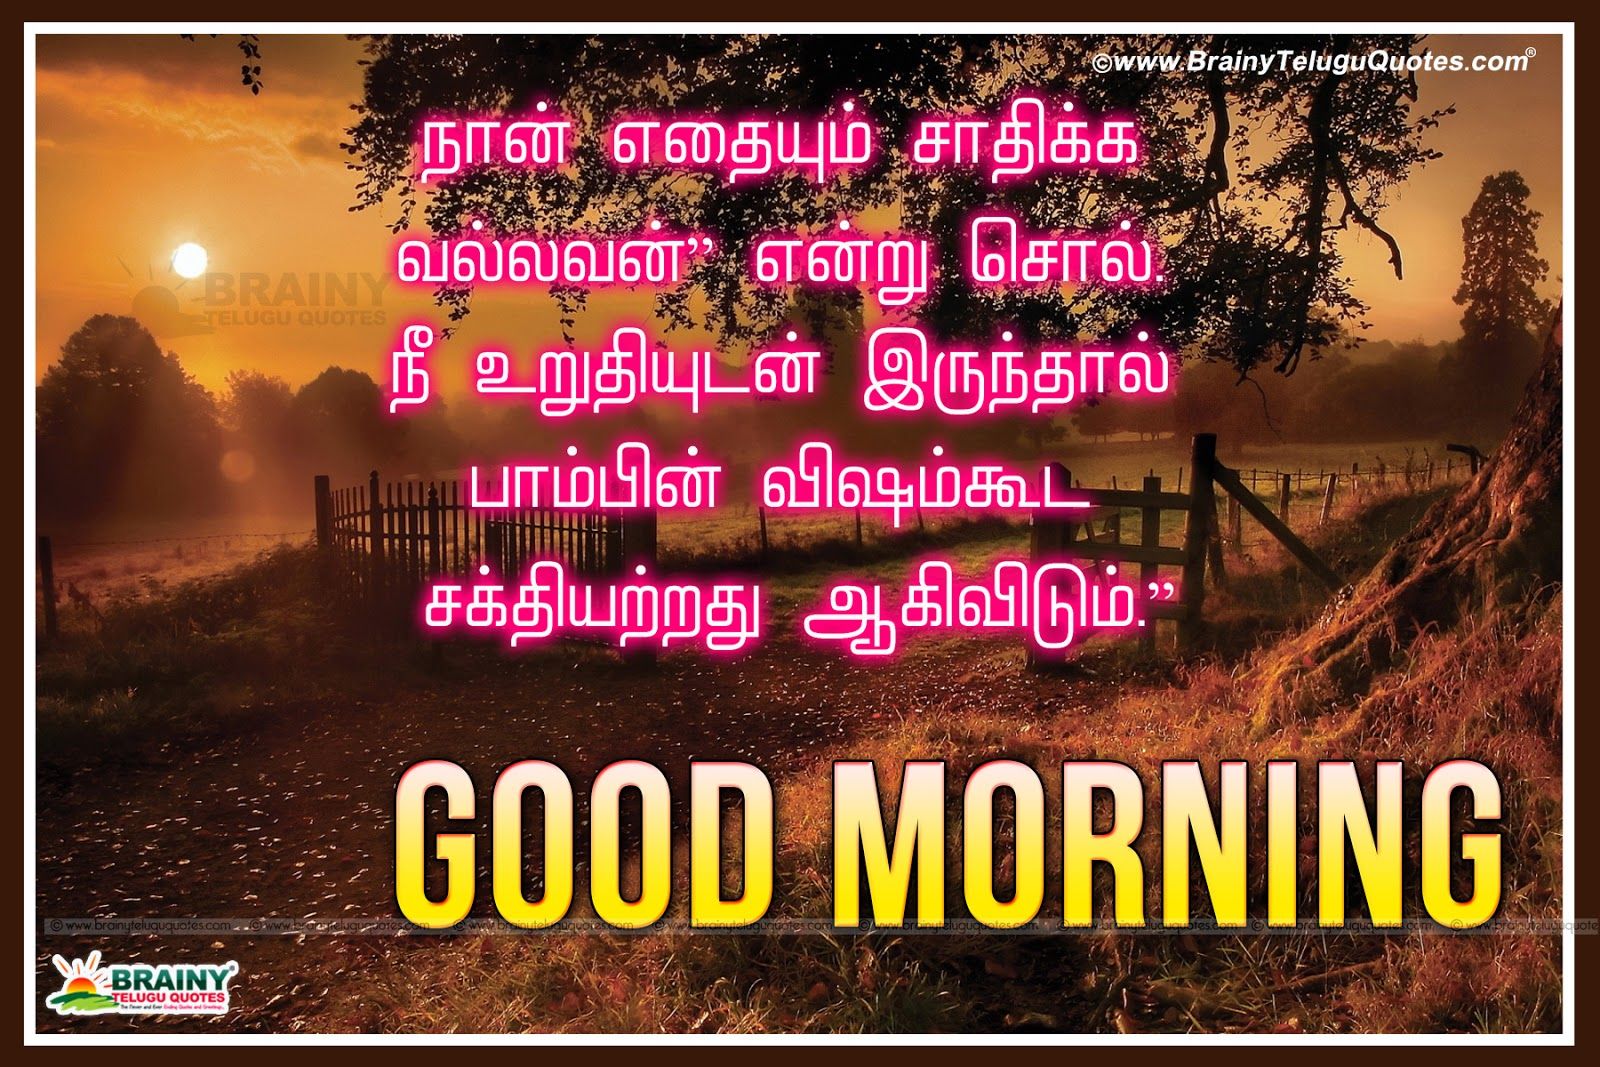 Tamil Good Morning Kavithaigal Greetings with inspirational quotes